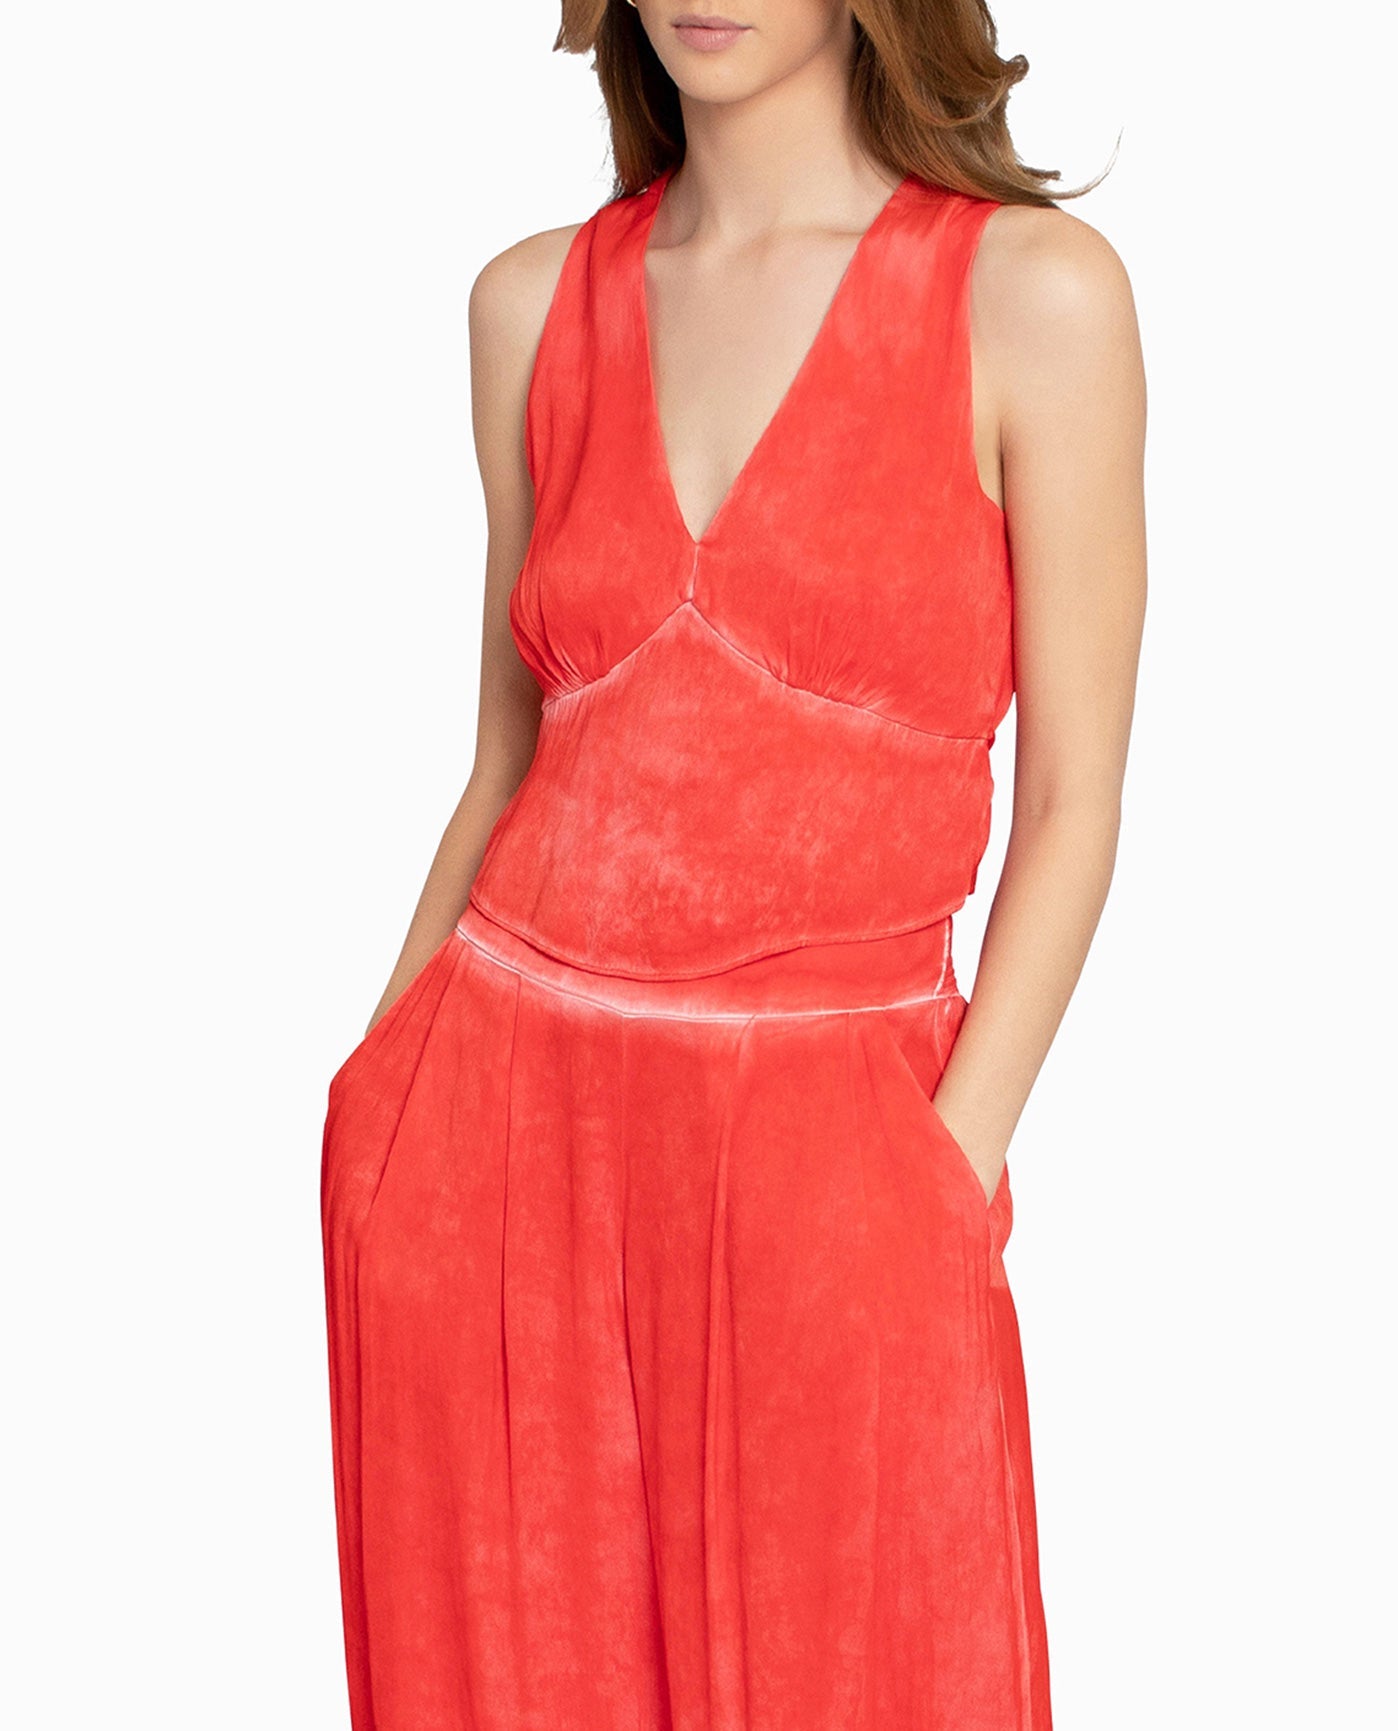 GARMENT DYED V-NECK TOP WITH MATCHING BOTTOMS | POPPY